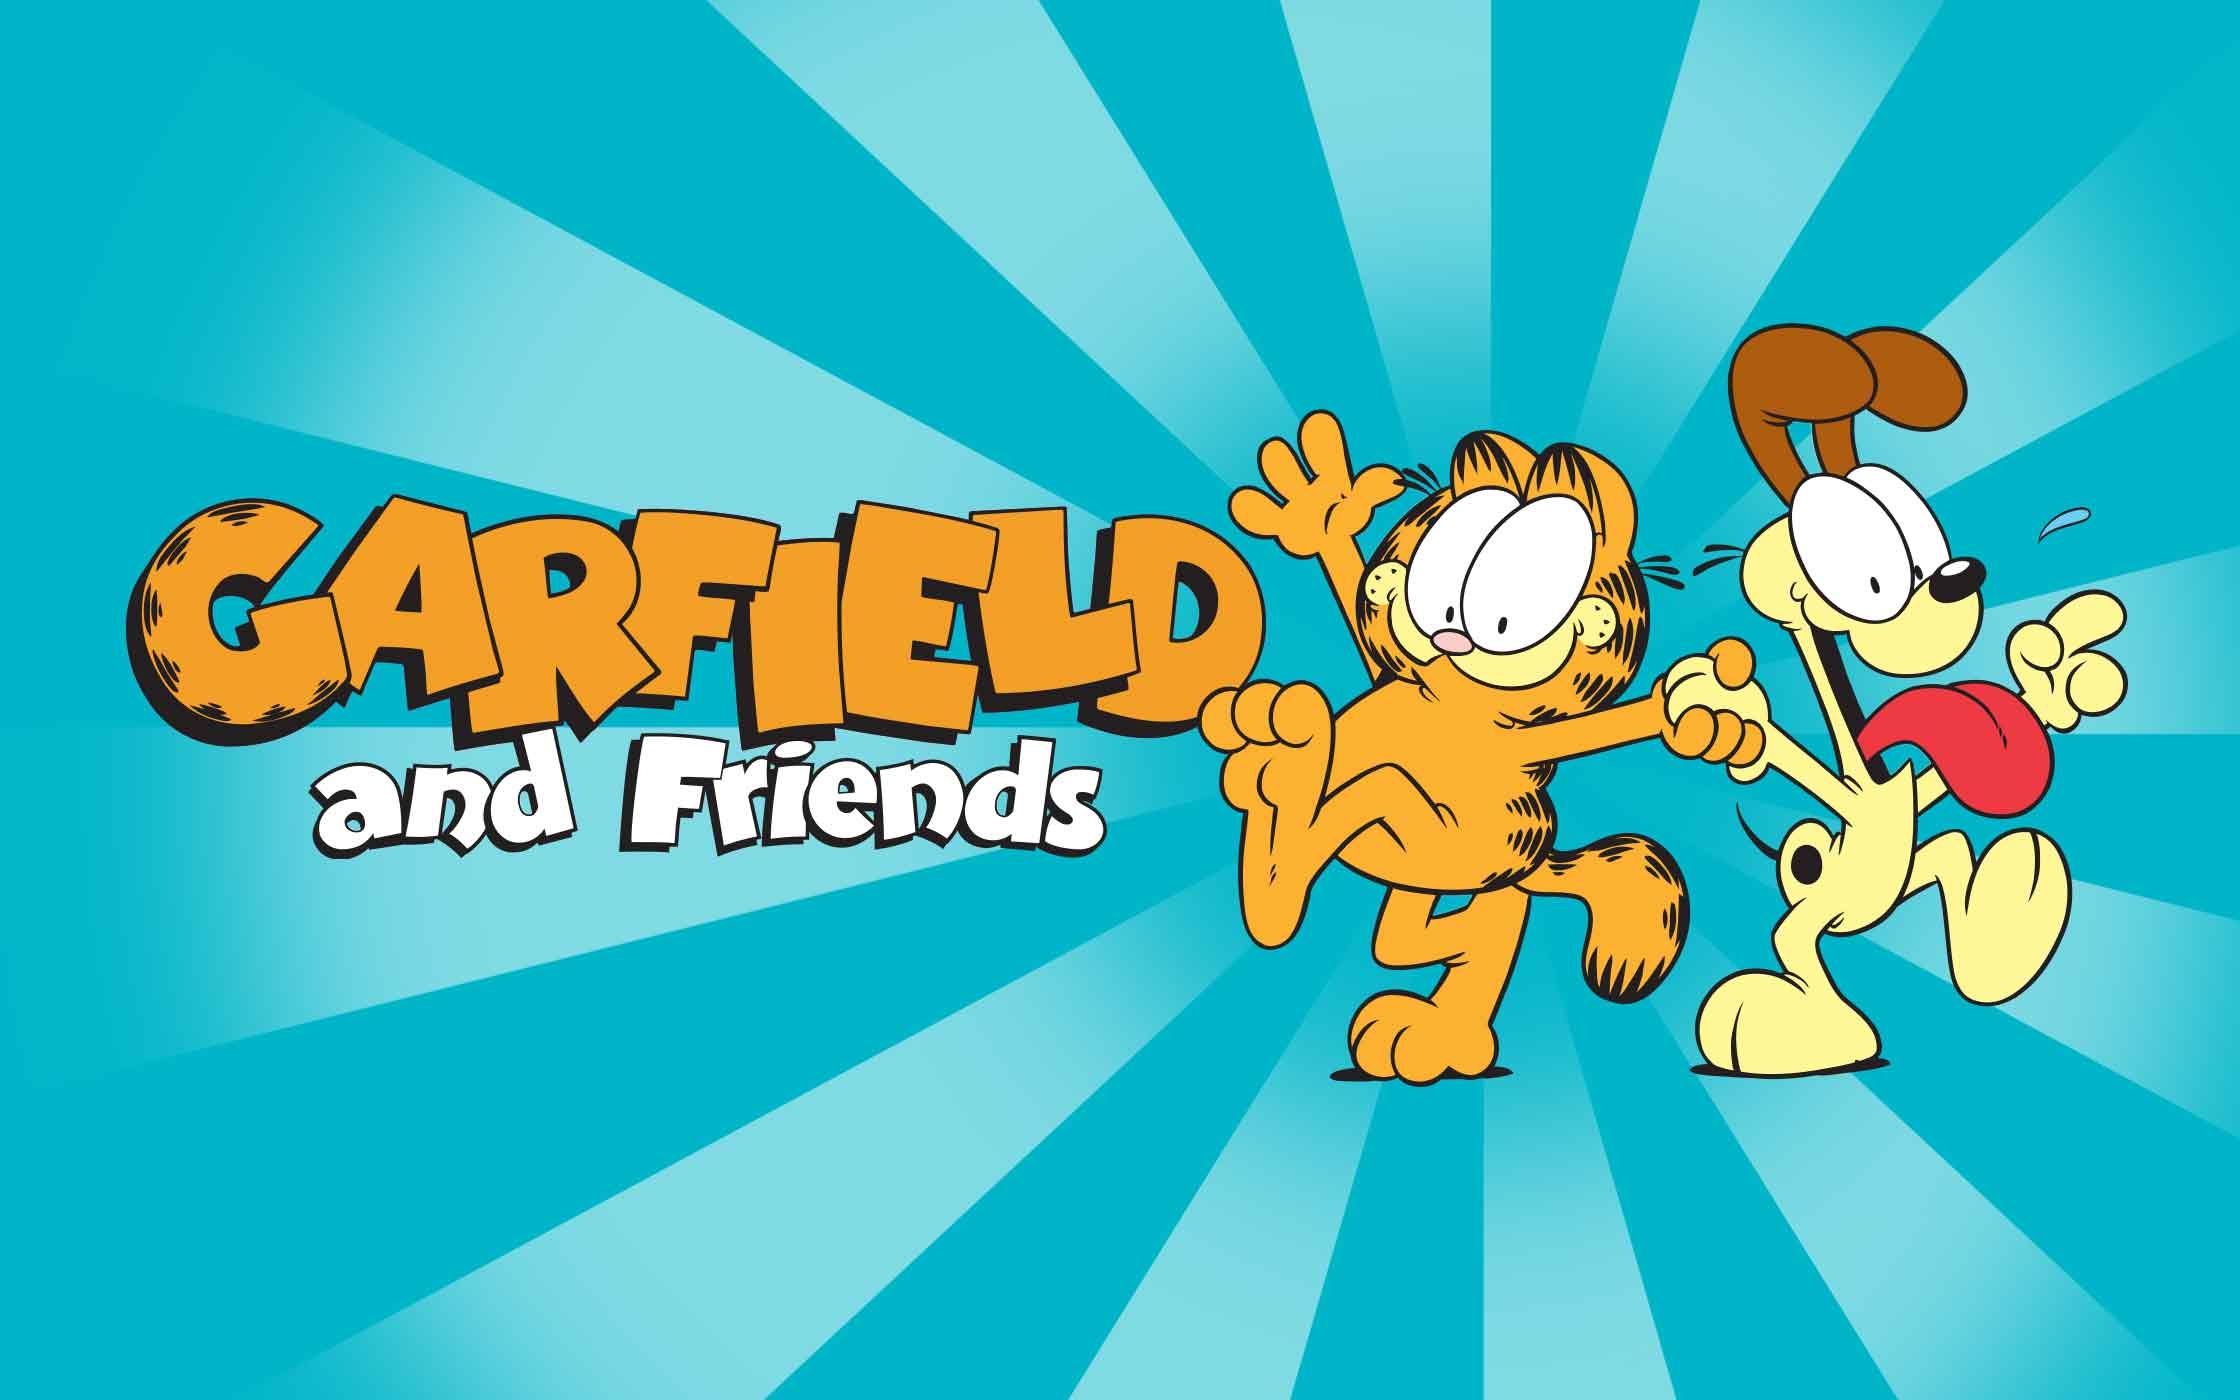 Garfield and Friends, 9 Story Media Group, Engaging banner, Animated entertainment, 2240x1400 HD Desktop